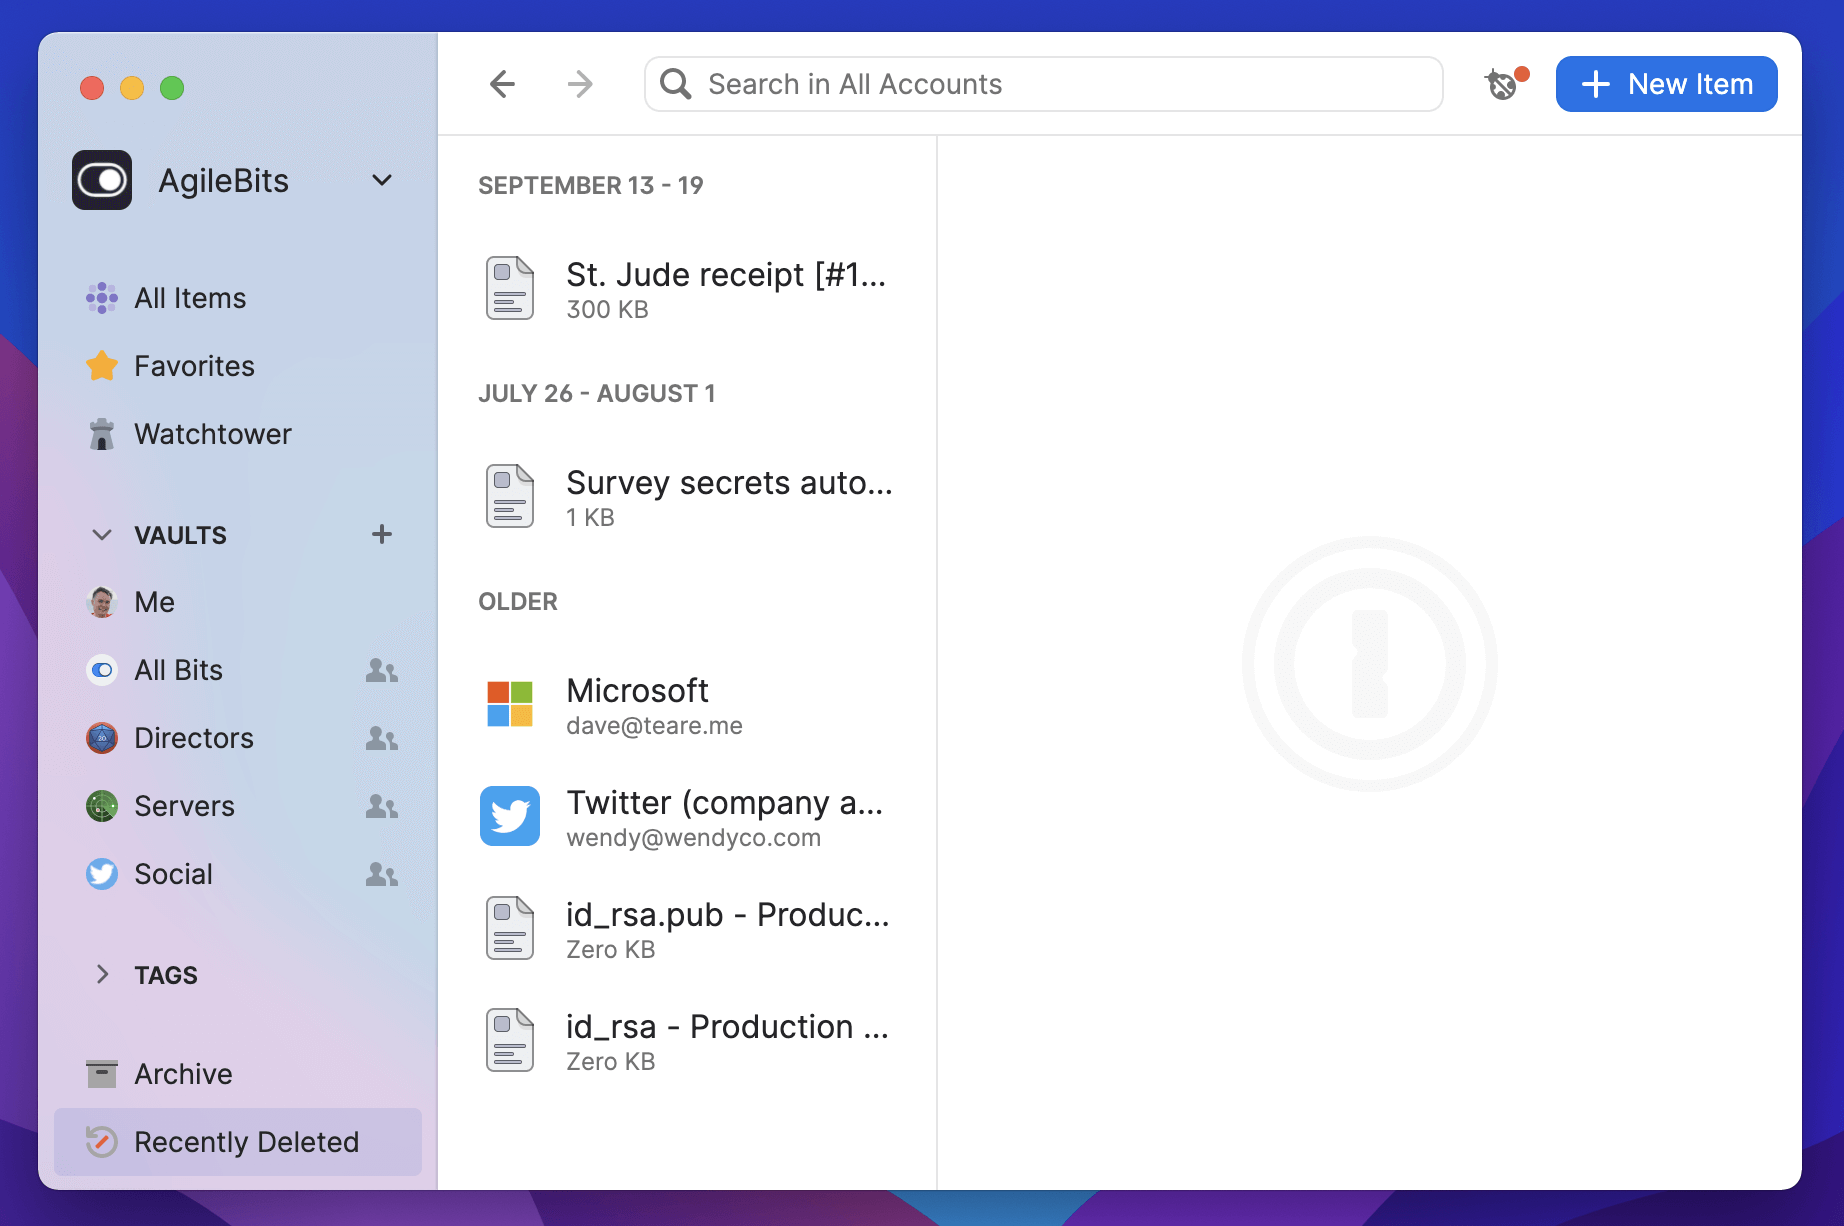 Viewing Recently Deleted items in the main 1Password app